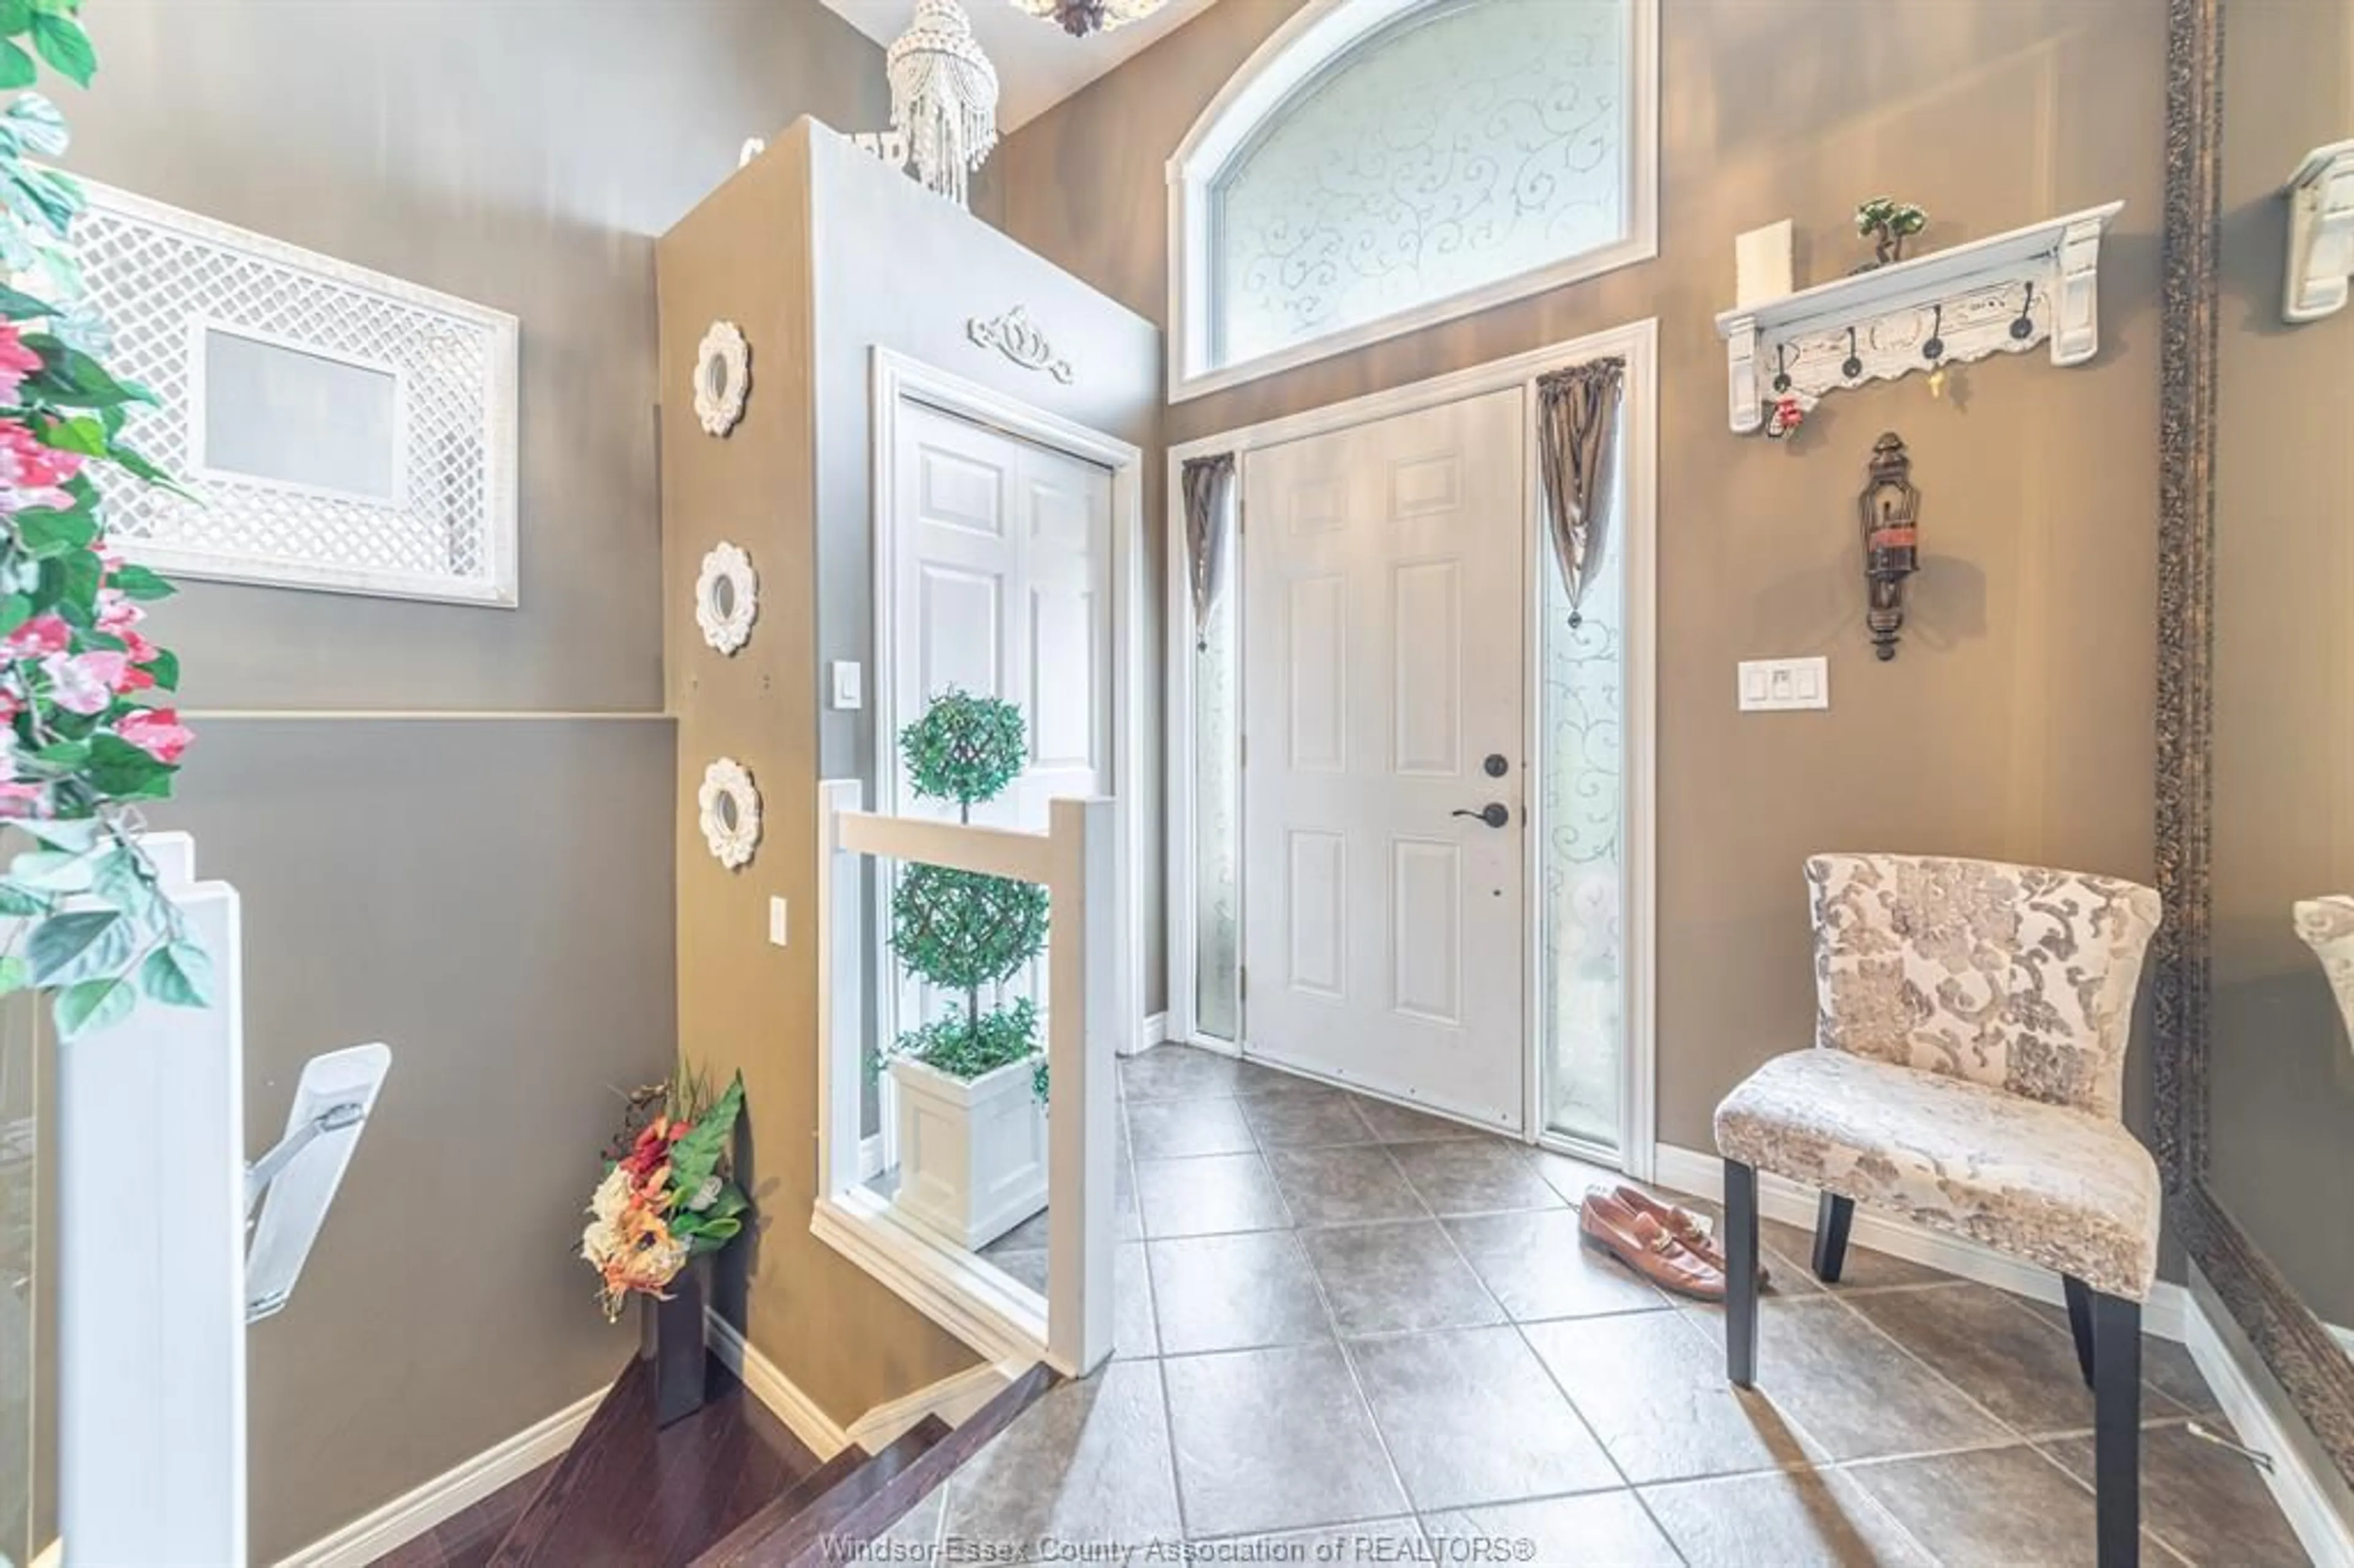 Indoor entryway for 11484 TIMBER BAY, Windsor Ontario N8R 2L1